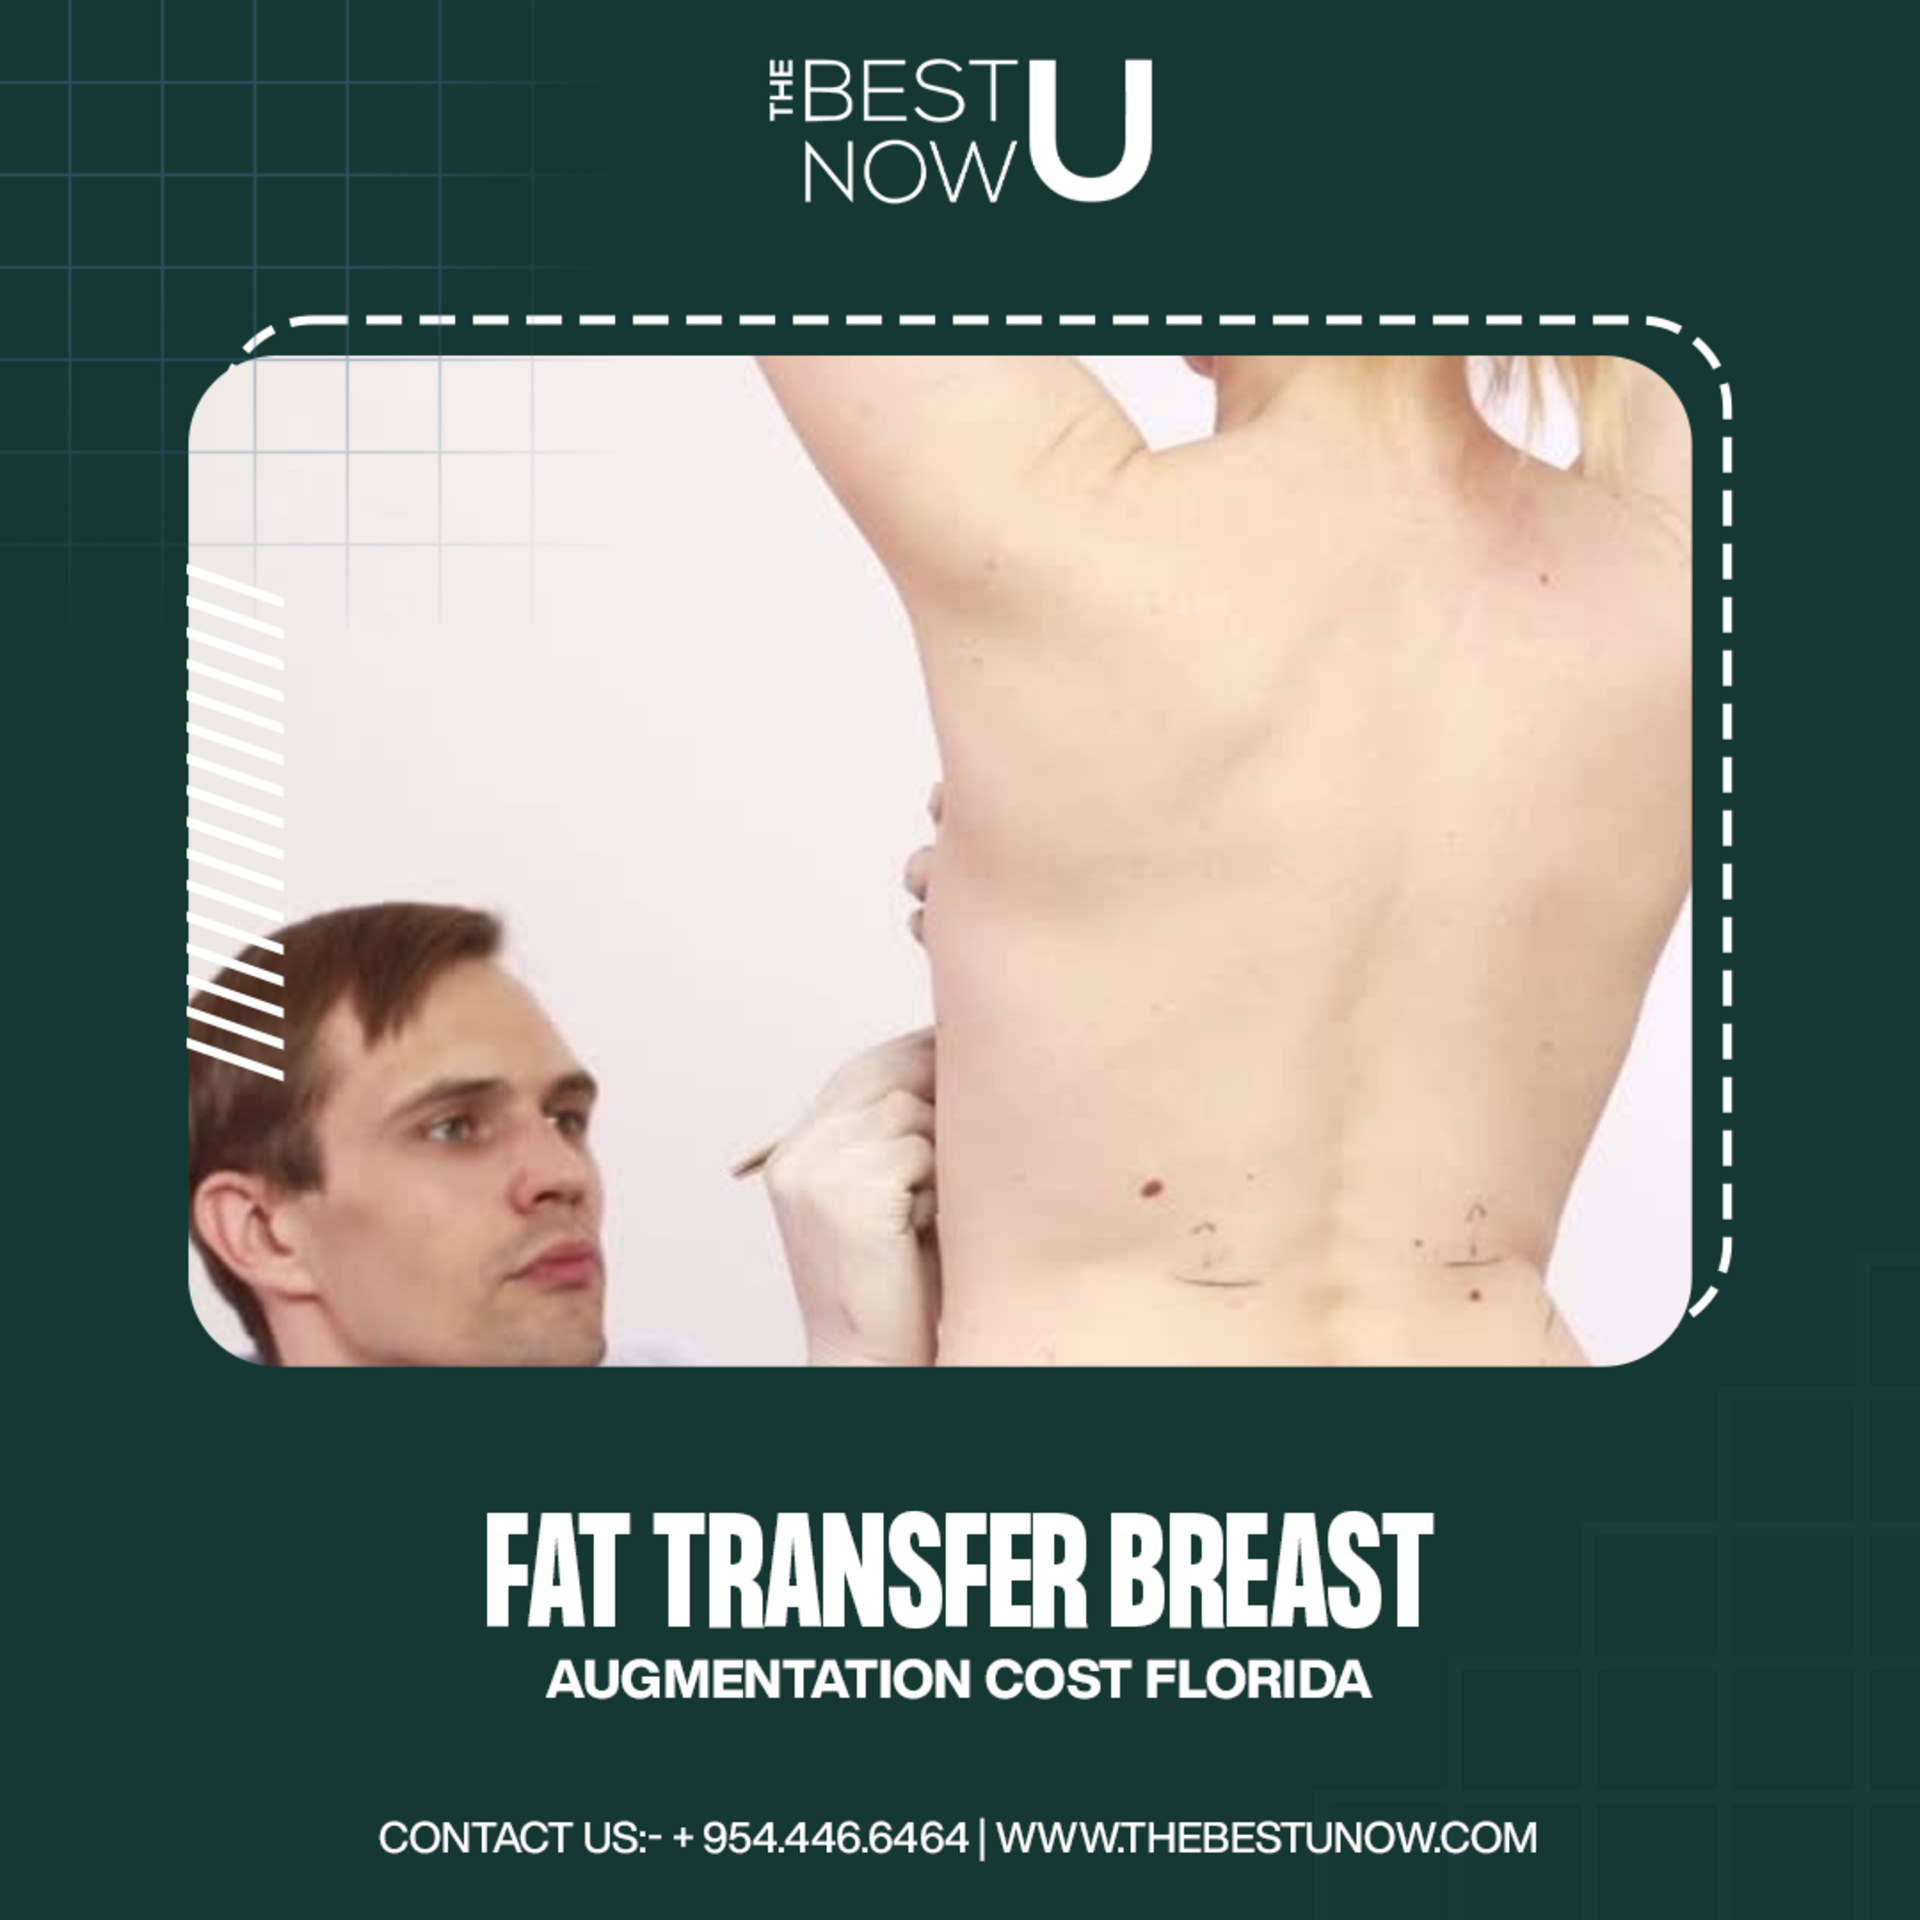 When Should You Consider Fat Transfer Breast Augmentation? | THE BEST U NOW